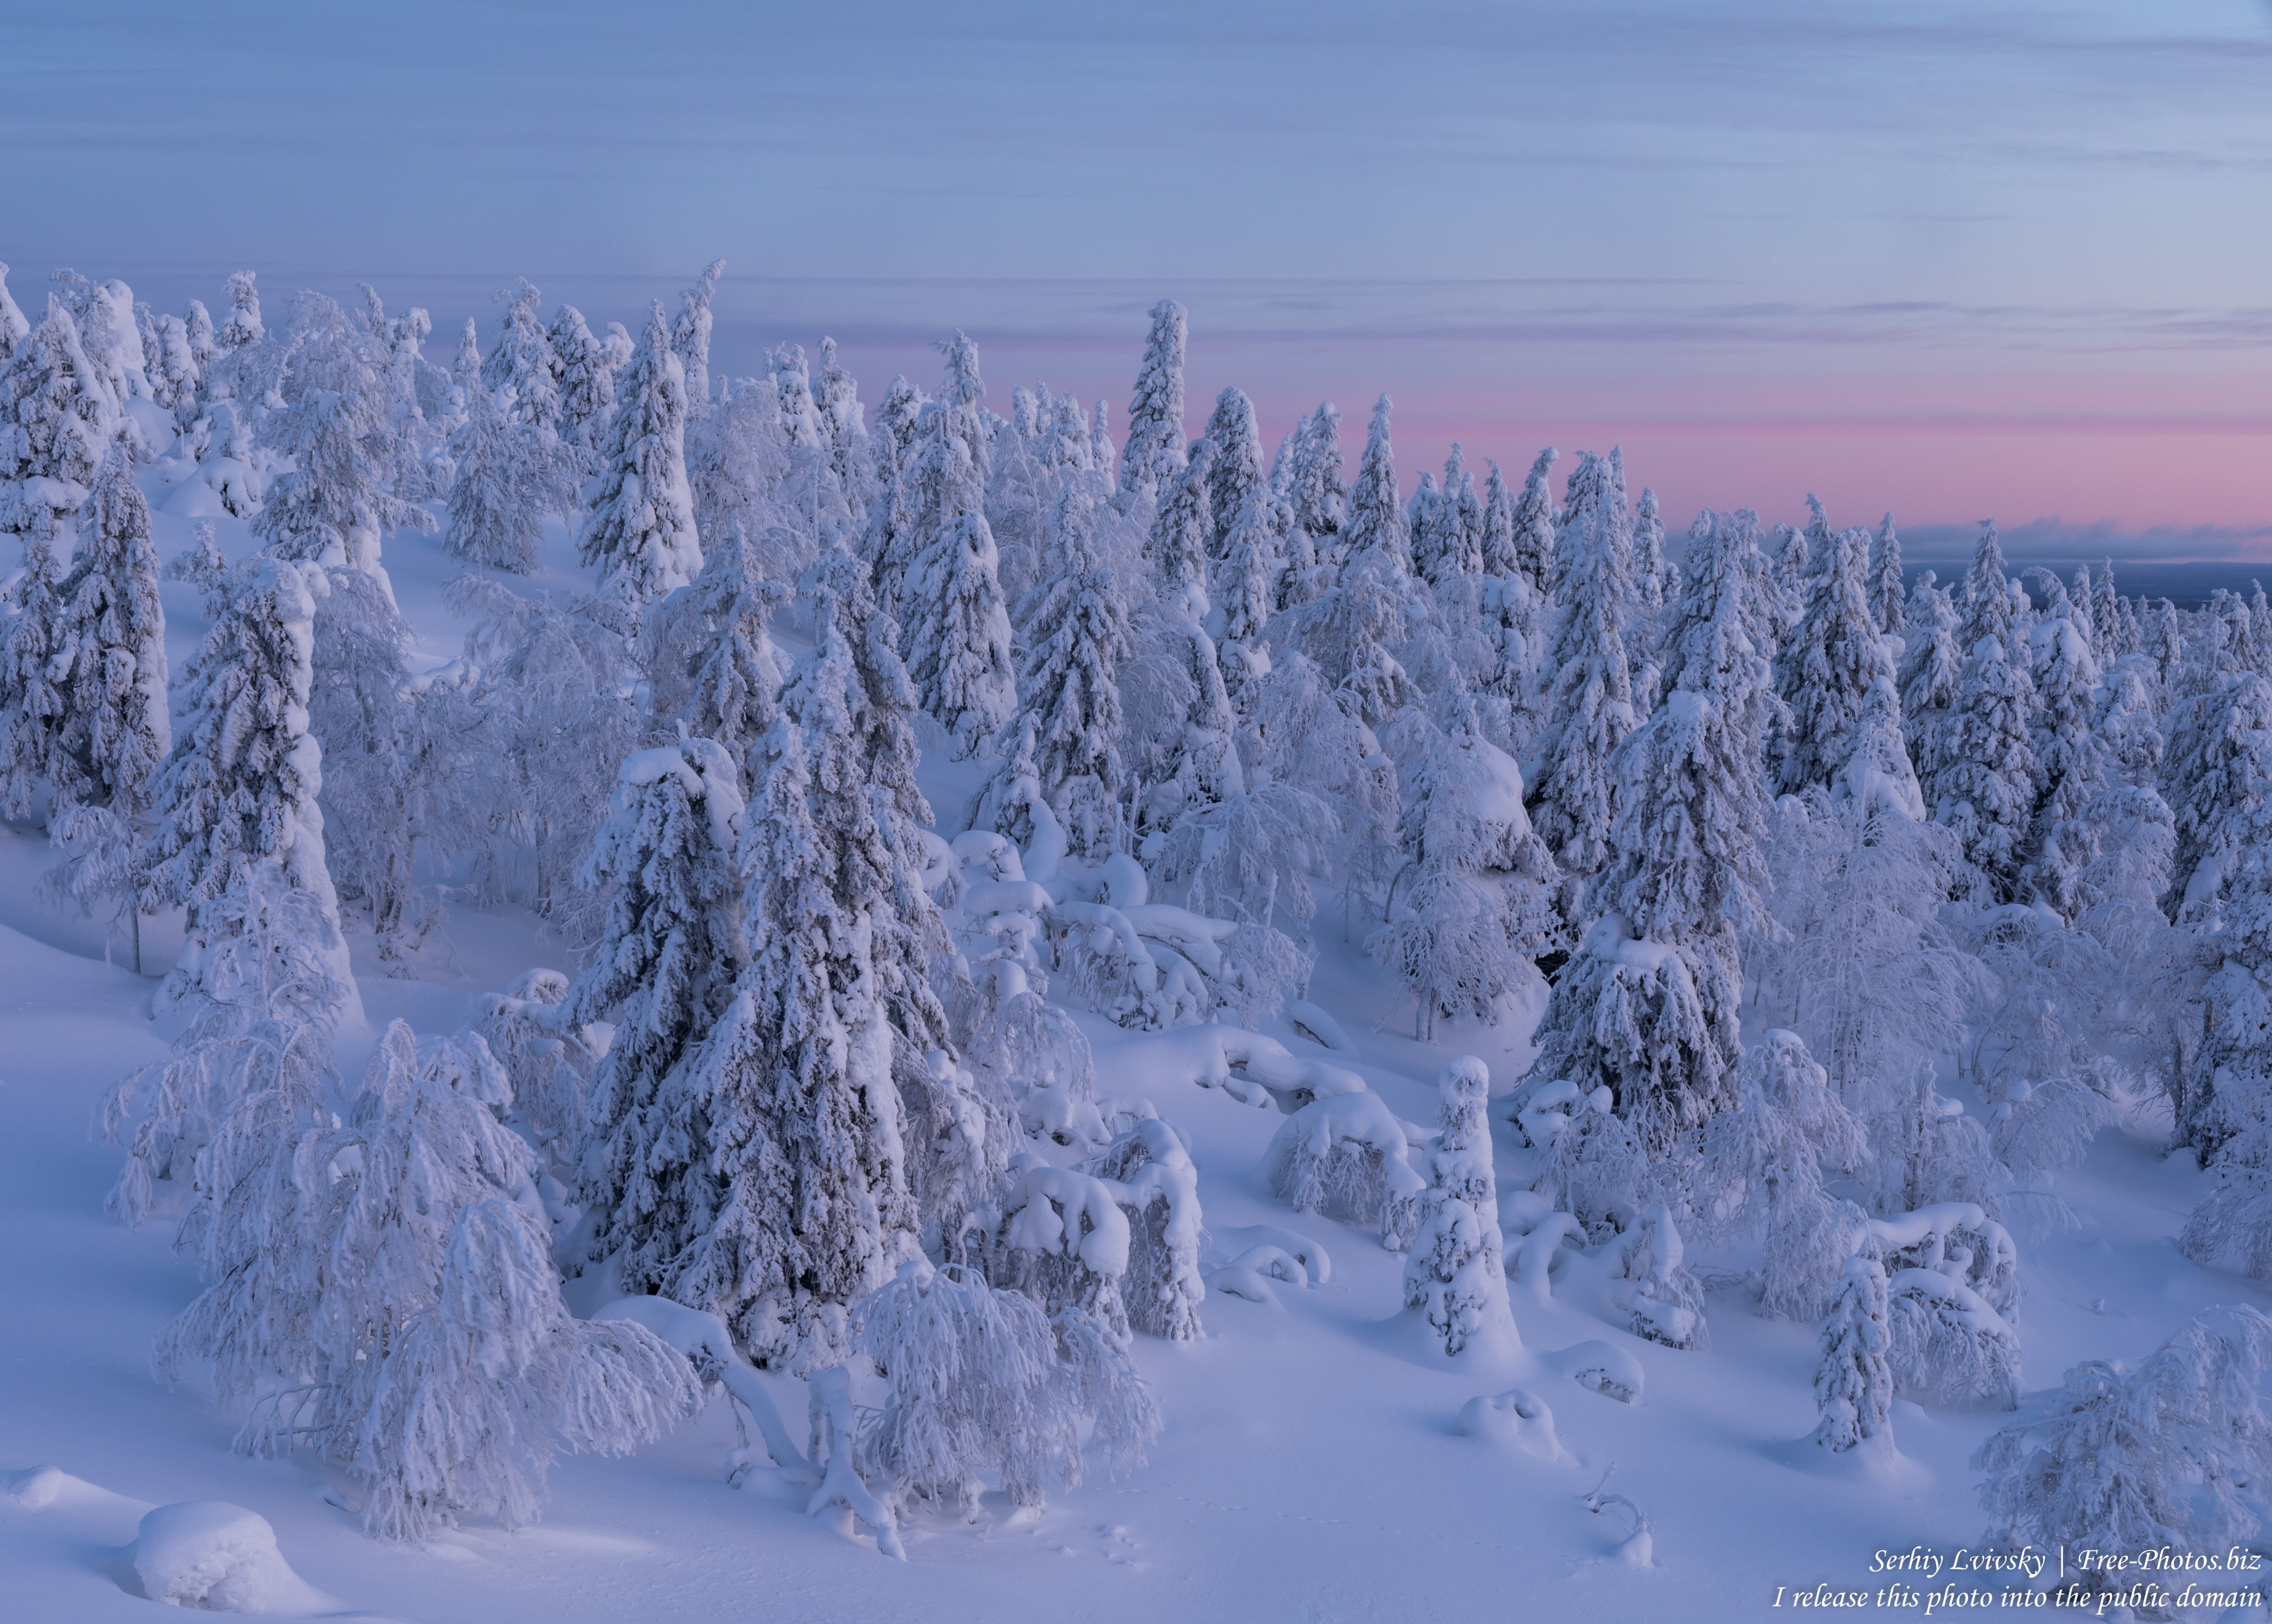 Valtavaara, Finland, photographed in January 2020 by Serhiy Lvivsky, picture 60